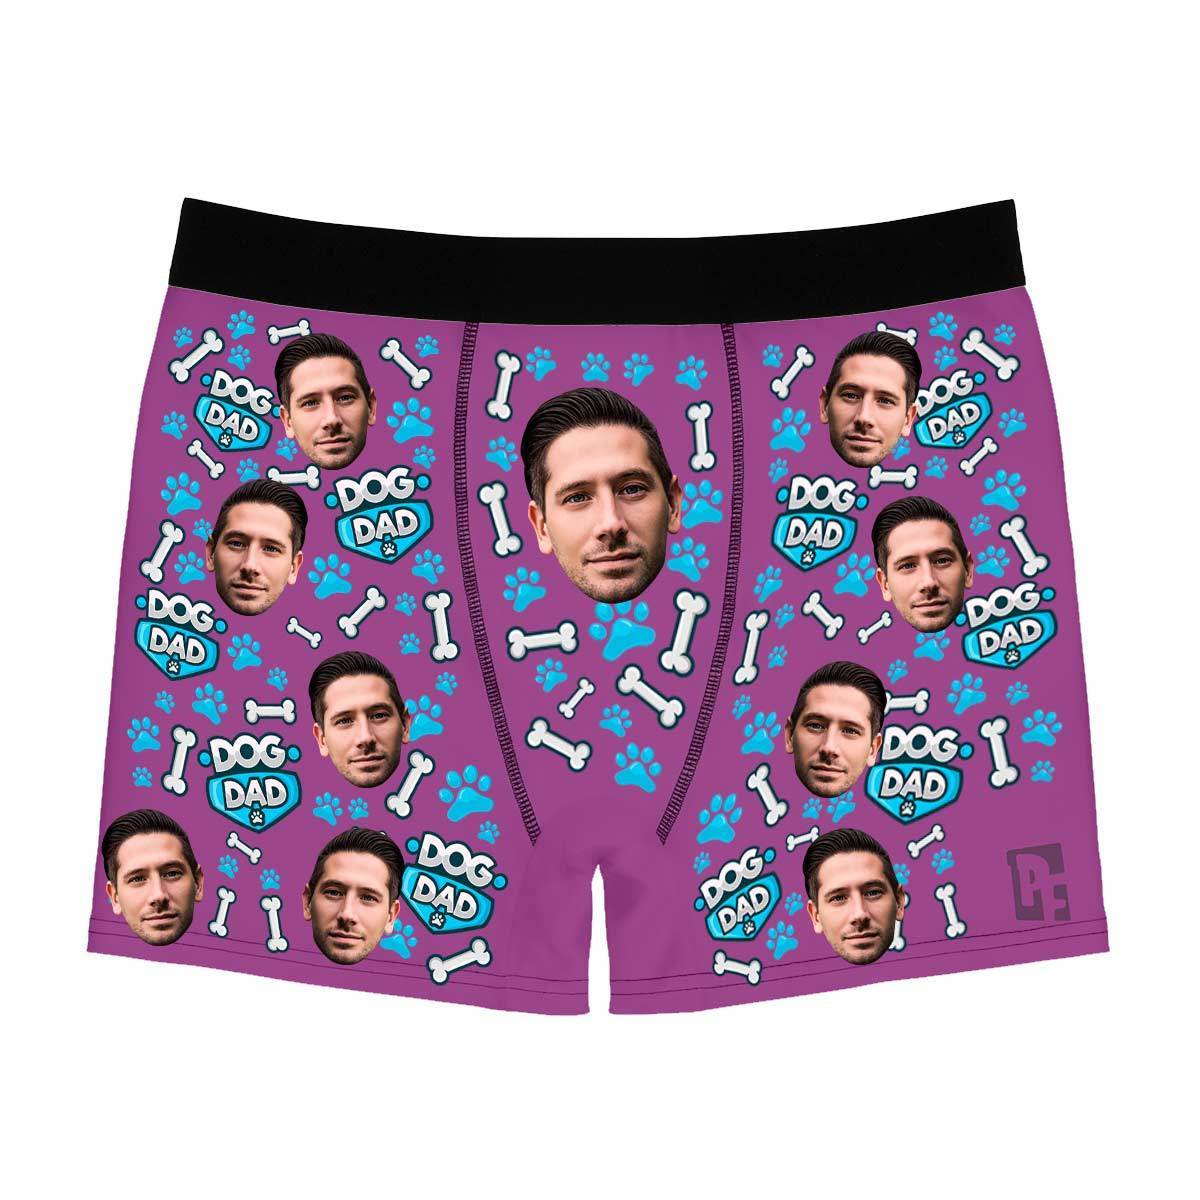 Purple Dog dad men's boxer briefs personalized with photo printed on them